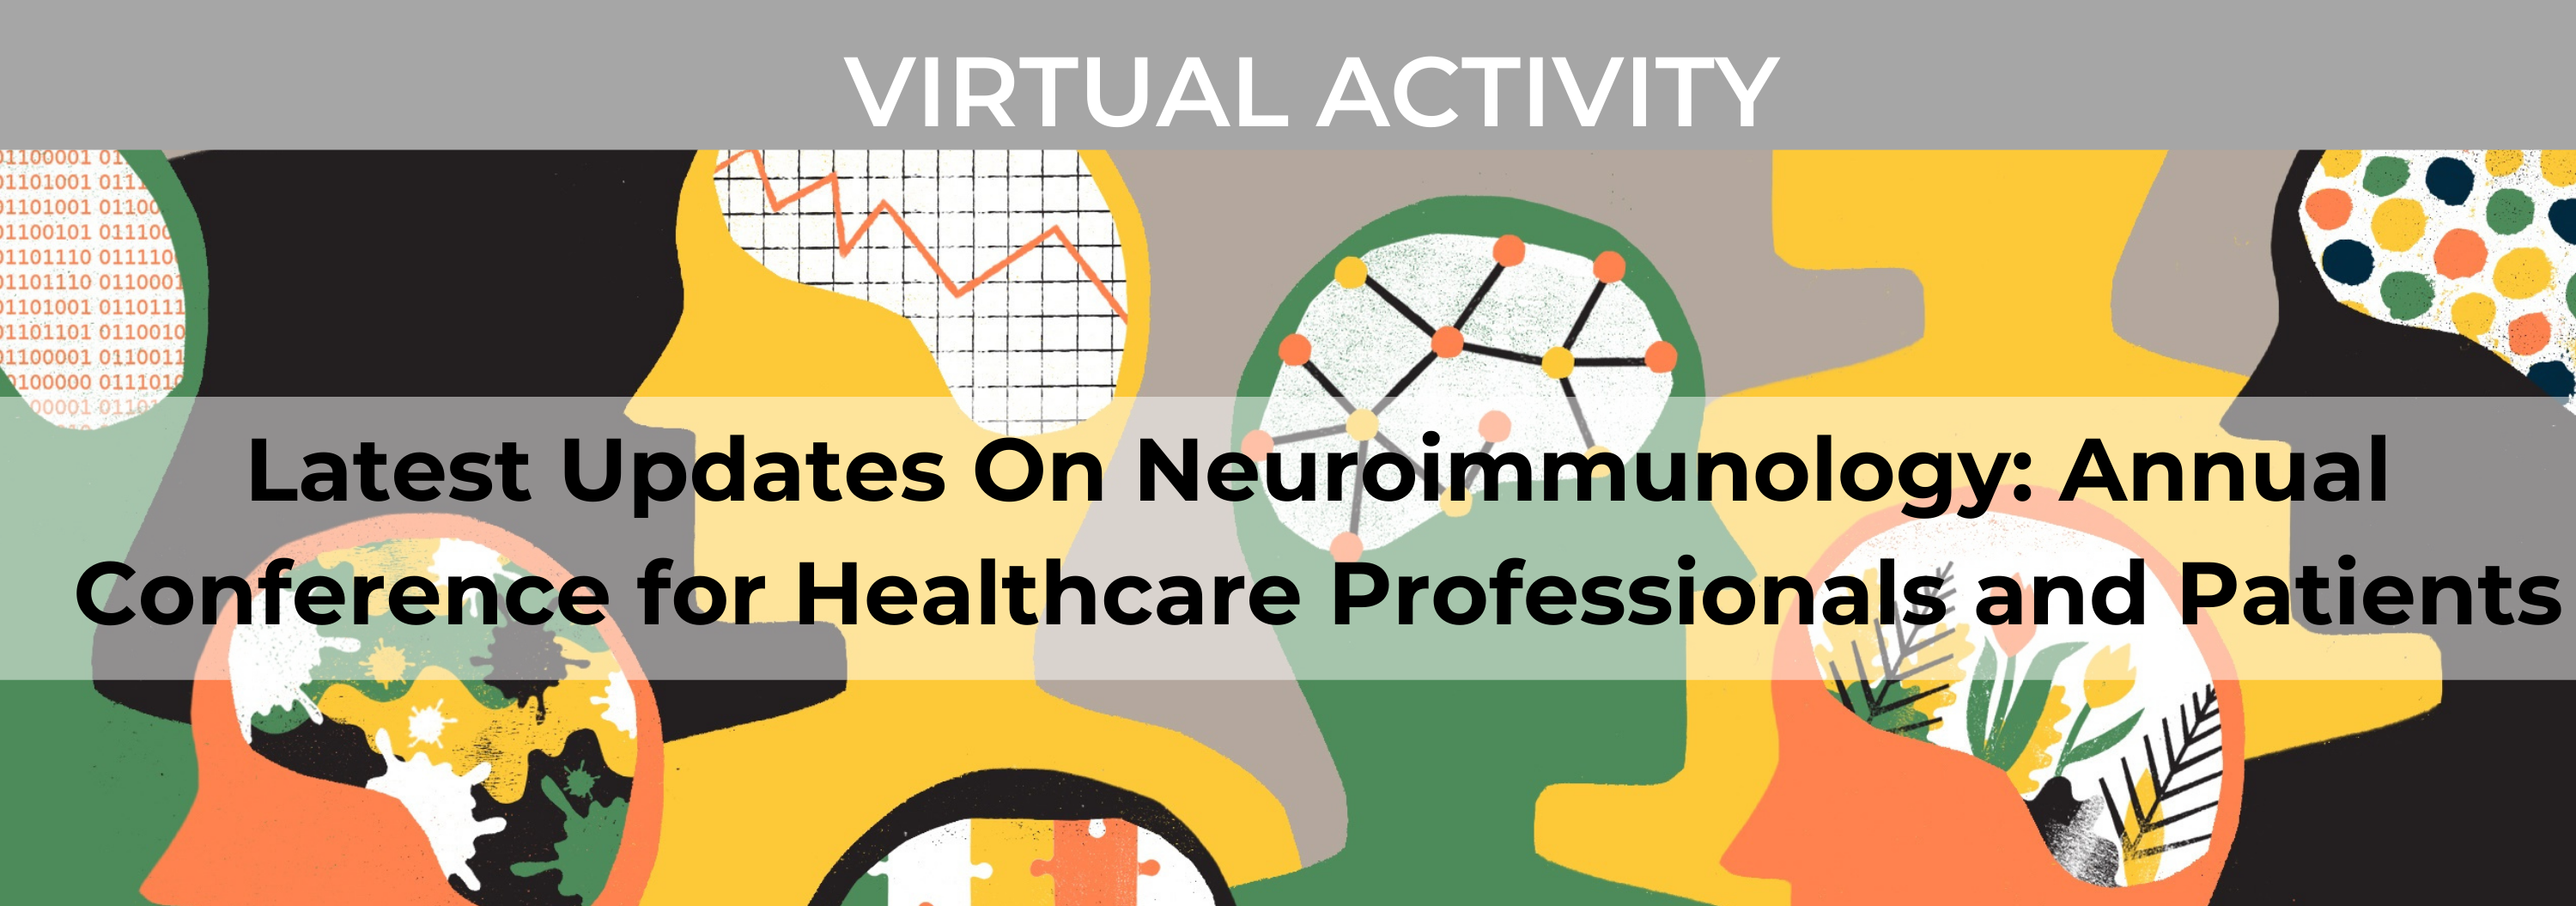 Latest Updates on Neuroimmunology: 6th Annual Conference for Healthcare Professionals and Patients Banner